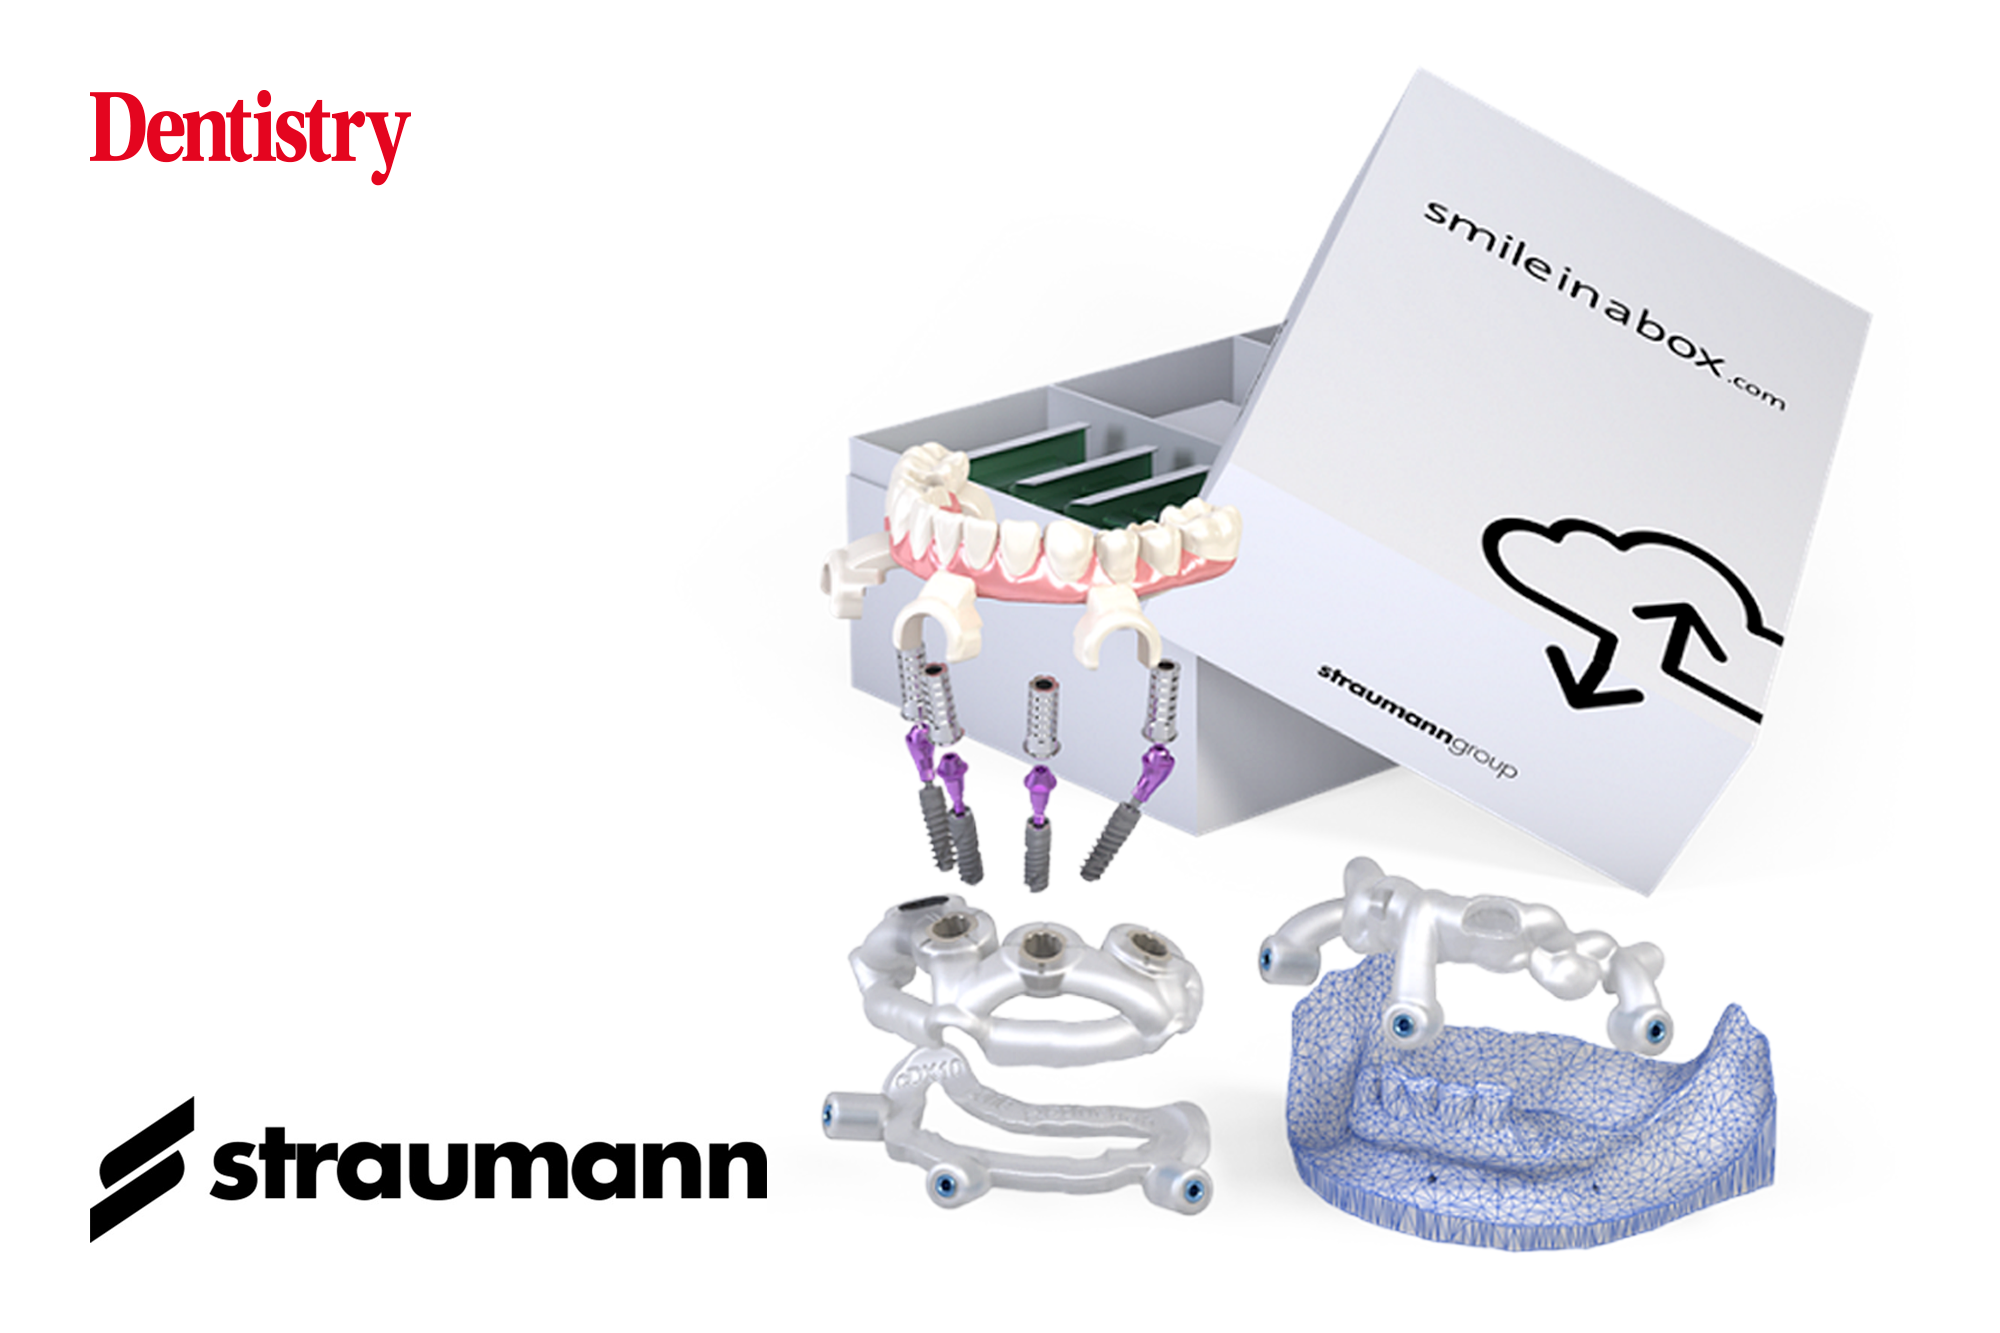 Straumann smile in a box for implant dentistry